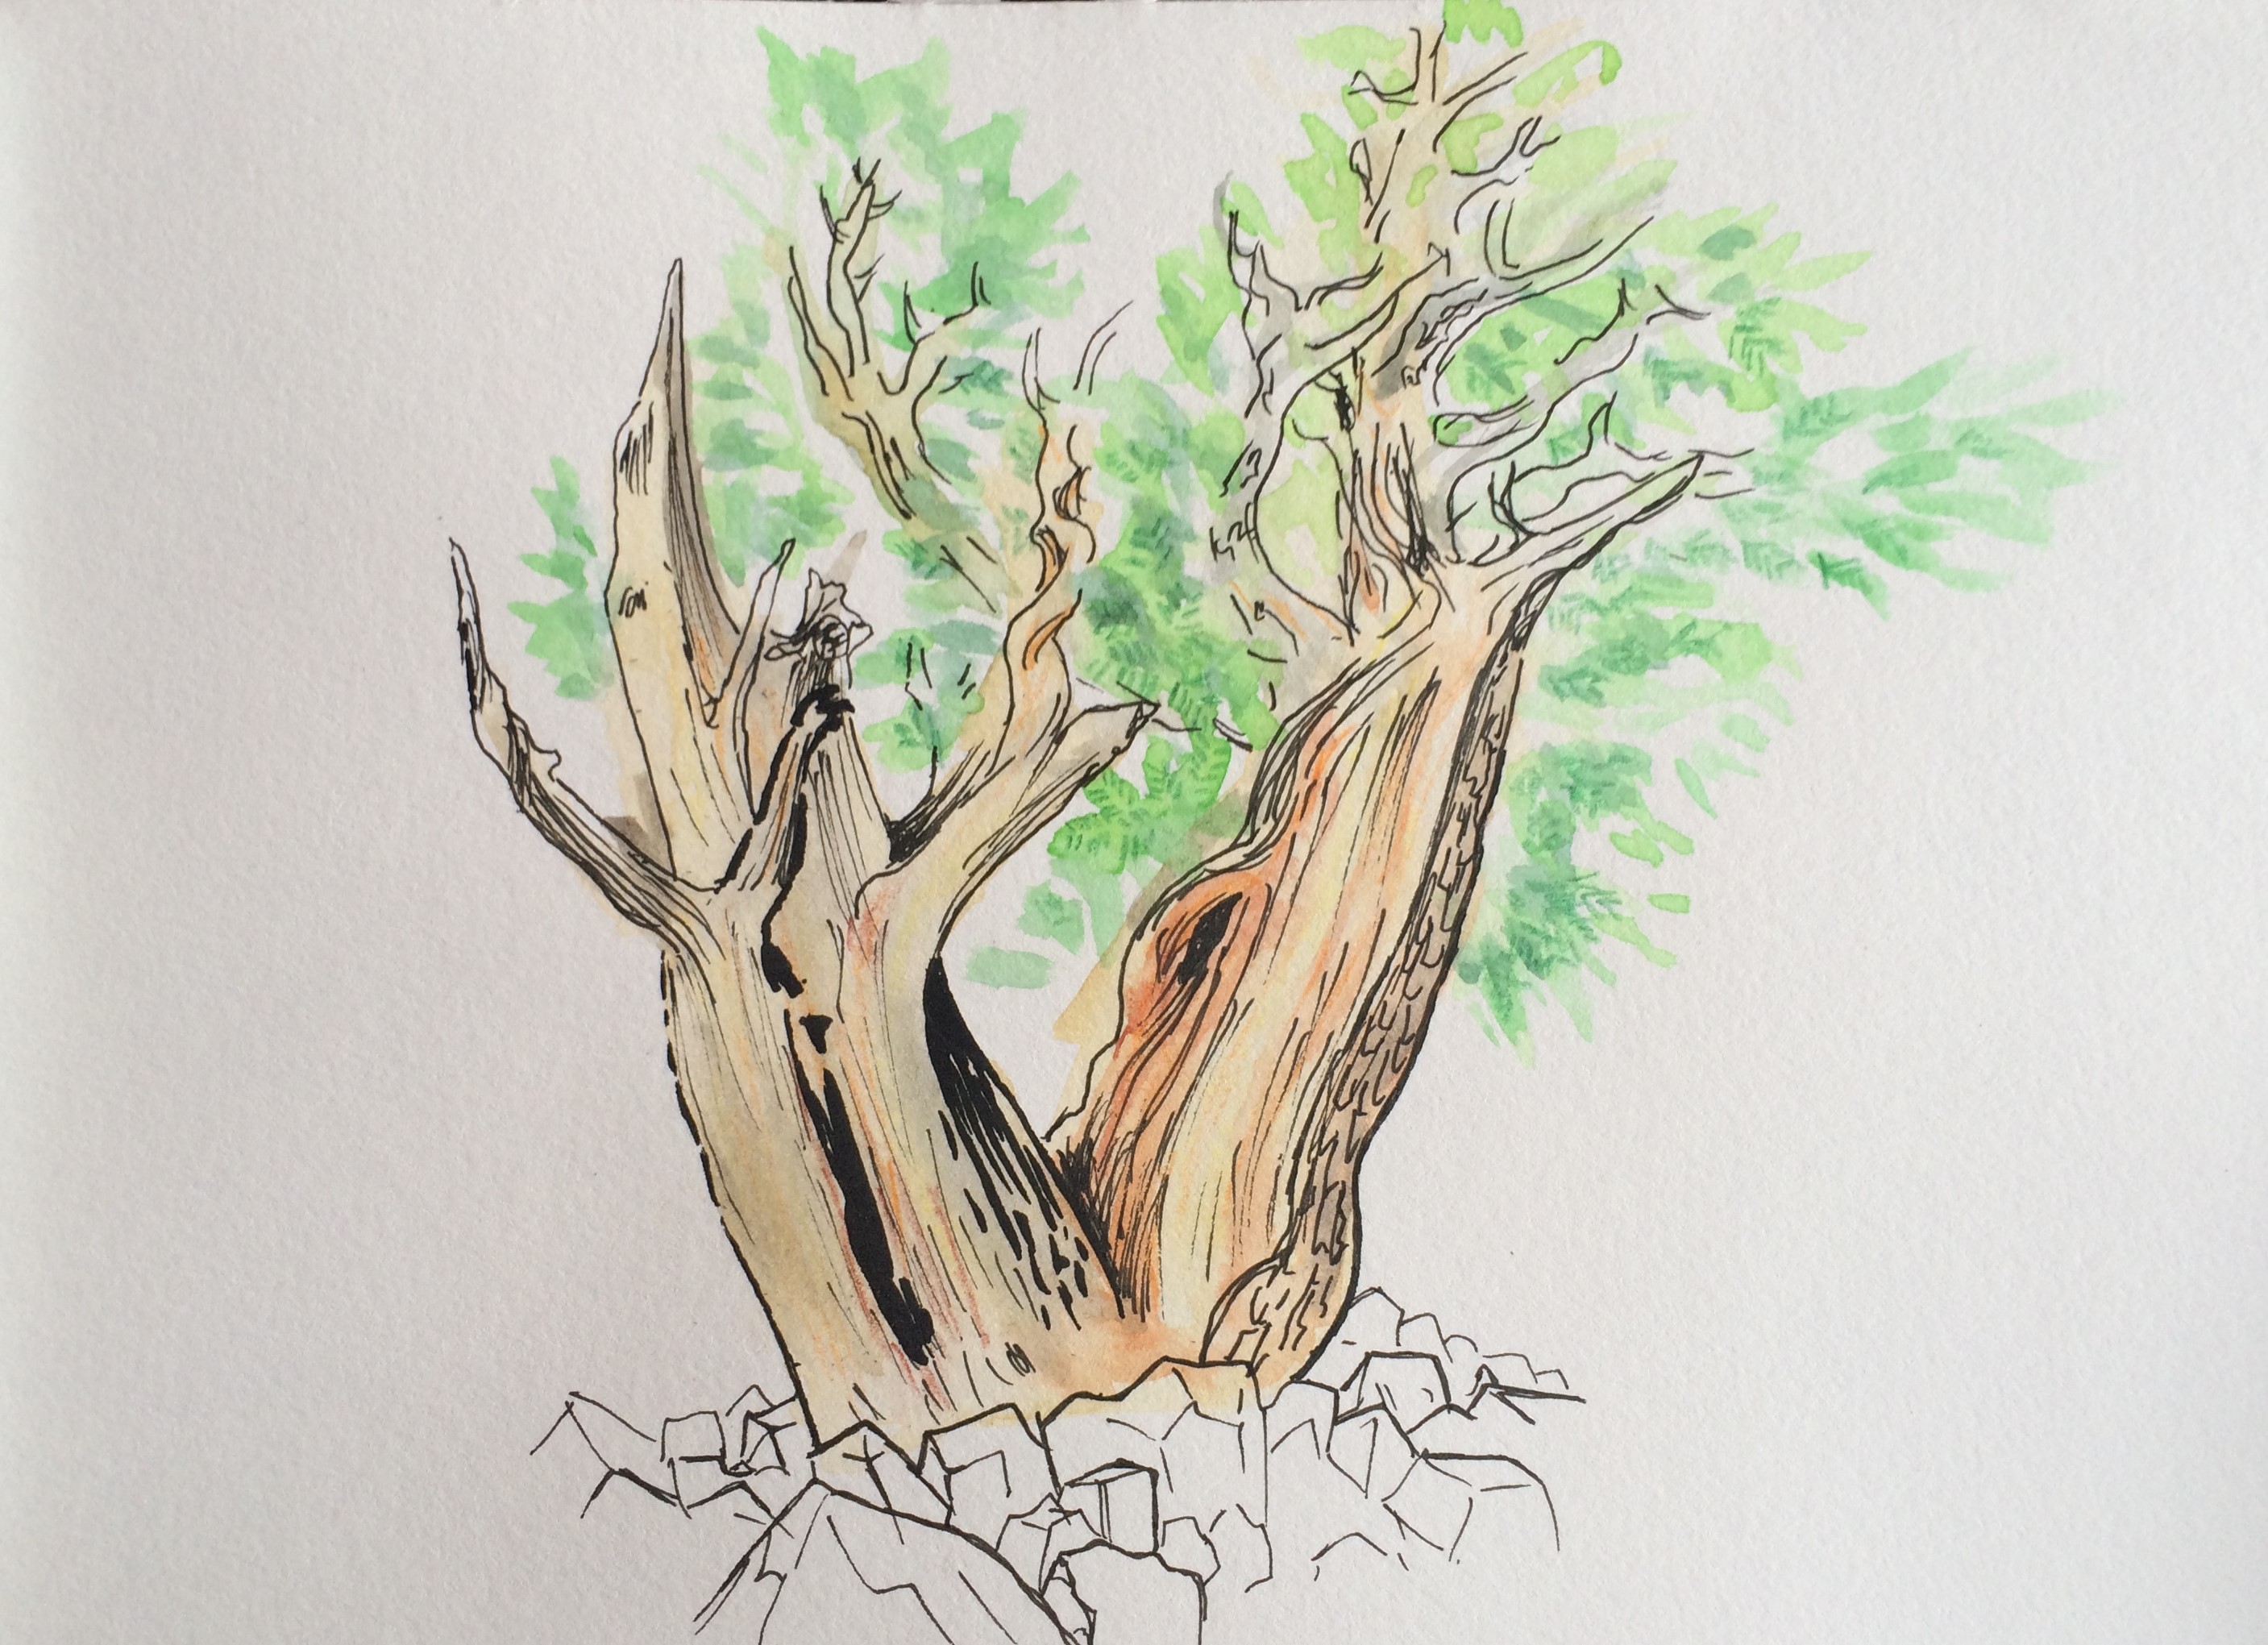 Day 9 – Interview With An Old Tree